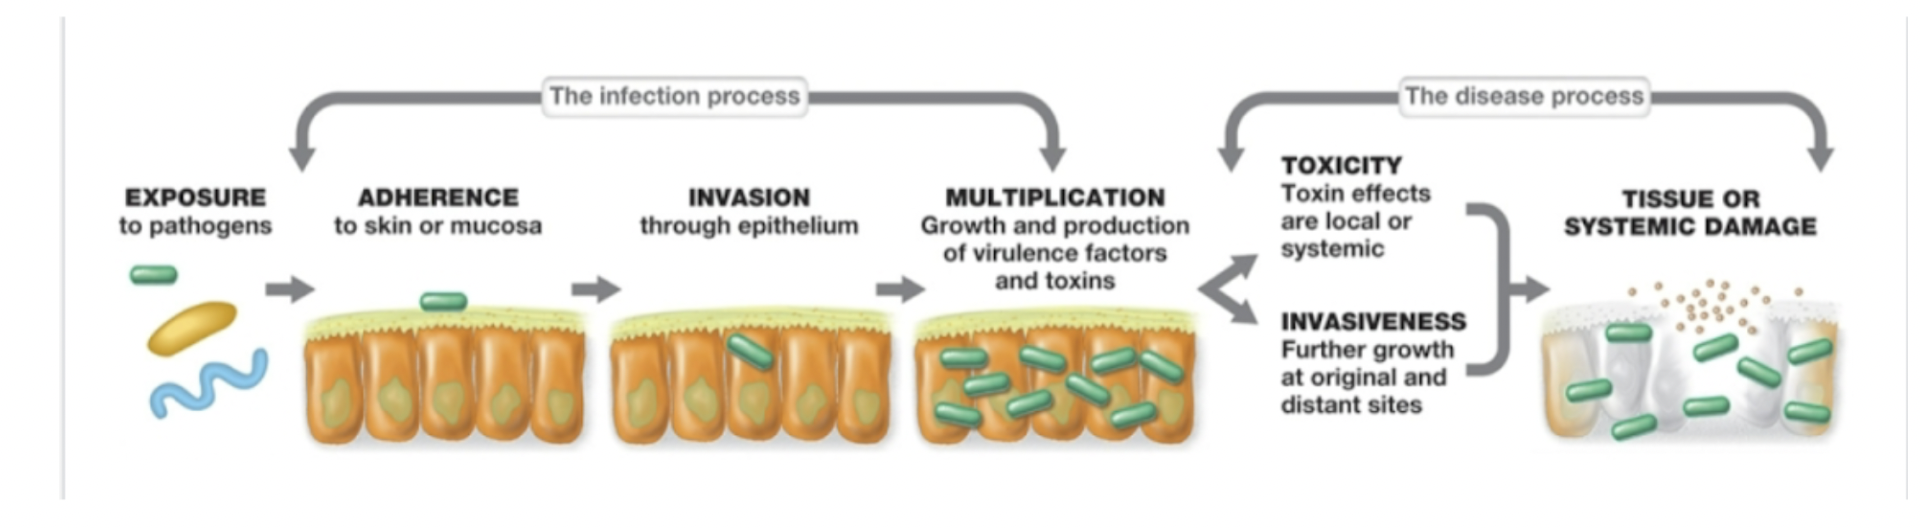 <ol><li><p>exposure to pathogens</p></li><li><p>adherence to skin or mucosa</p></li><li><p>invasion through epithelium</p></li><li><p>multiplication: growth and production of virulence factors and toxins. this can diverge into one of two things</p></li><li><p>toxicity: toxin effects are local or systemic</p></li><li><p>invasiveness: further growth at origin and distant sites both result in tissue or systemic damage</p></li></ol>